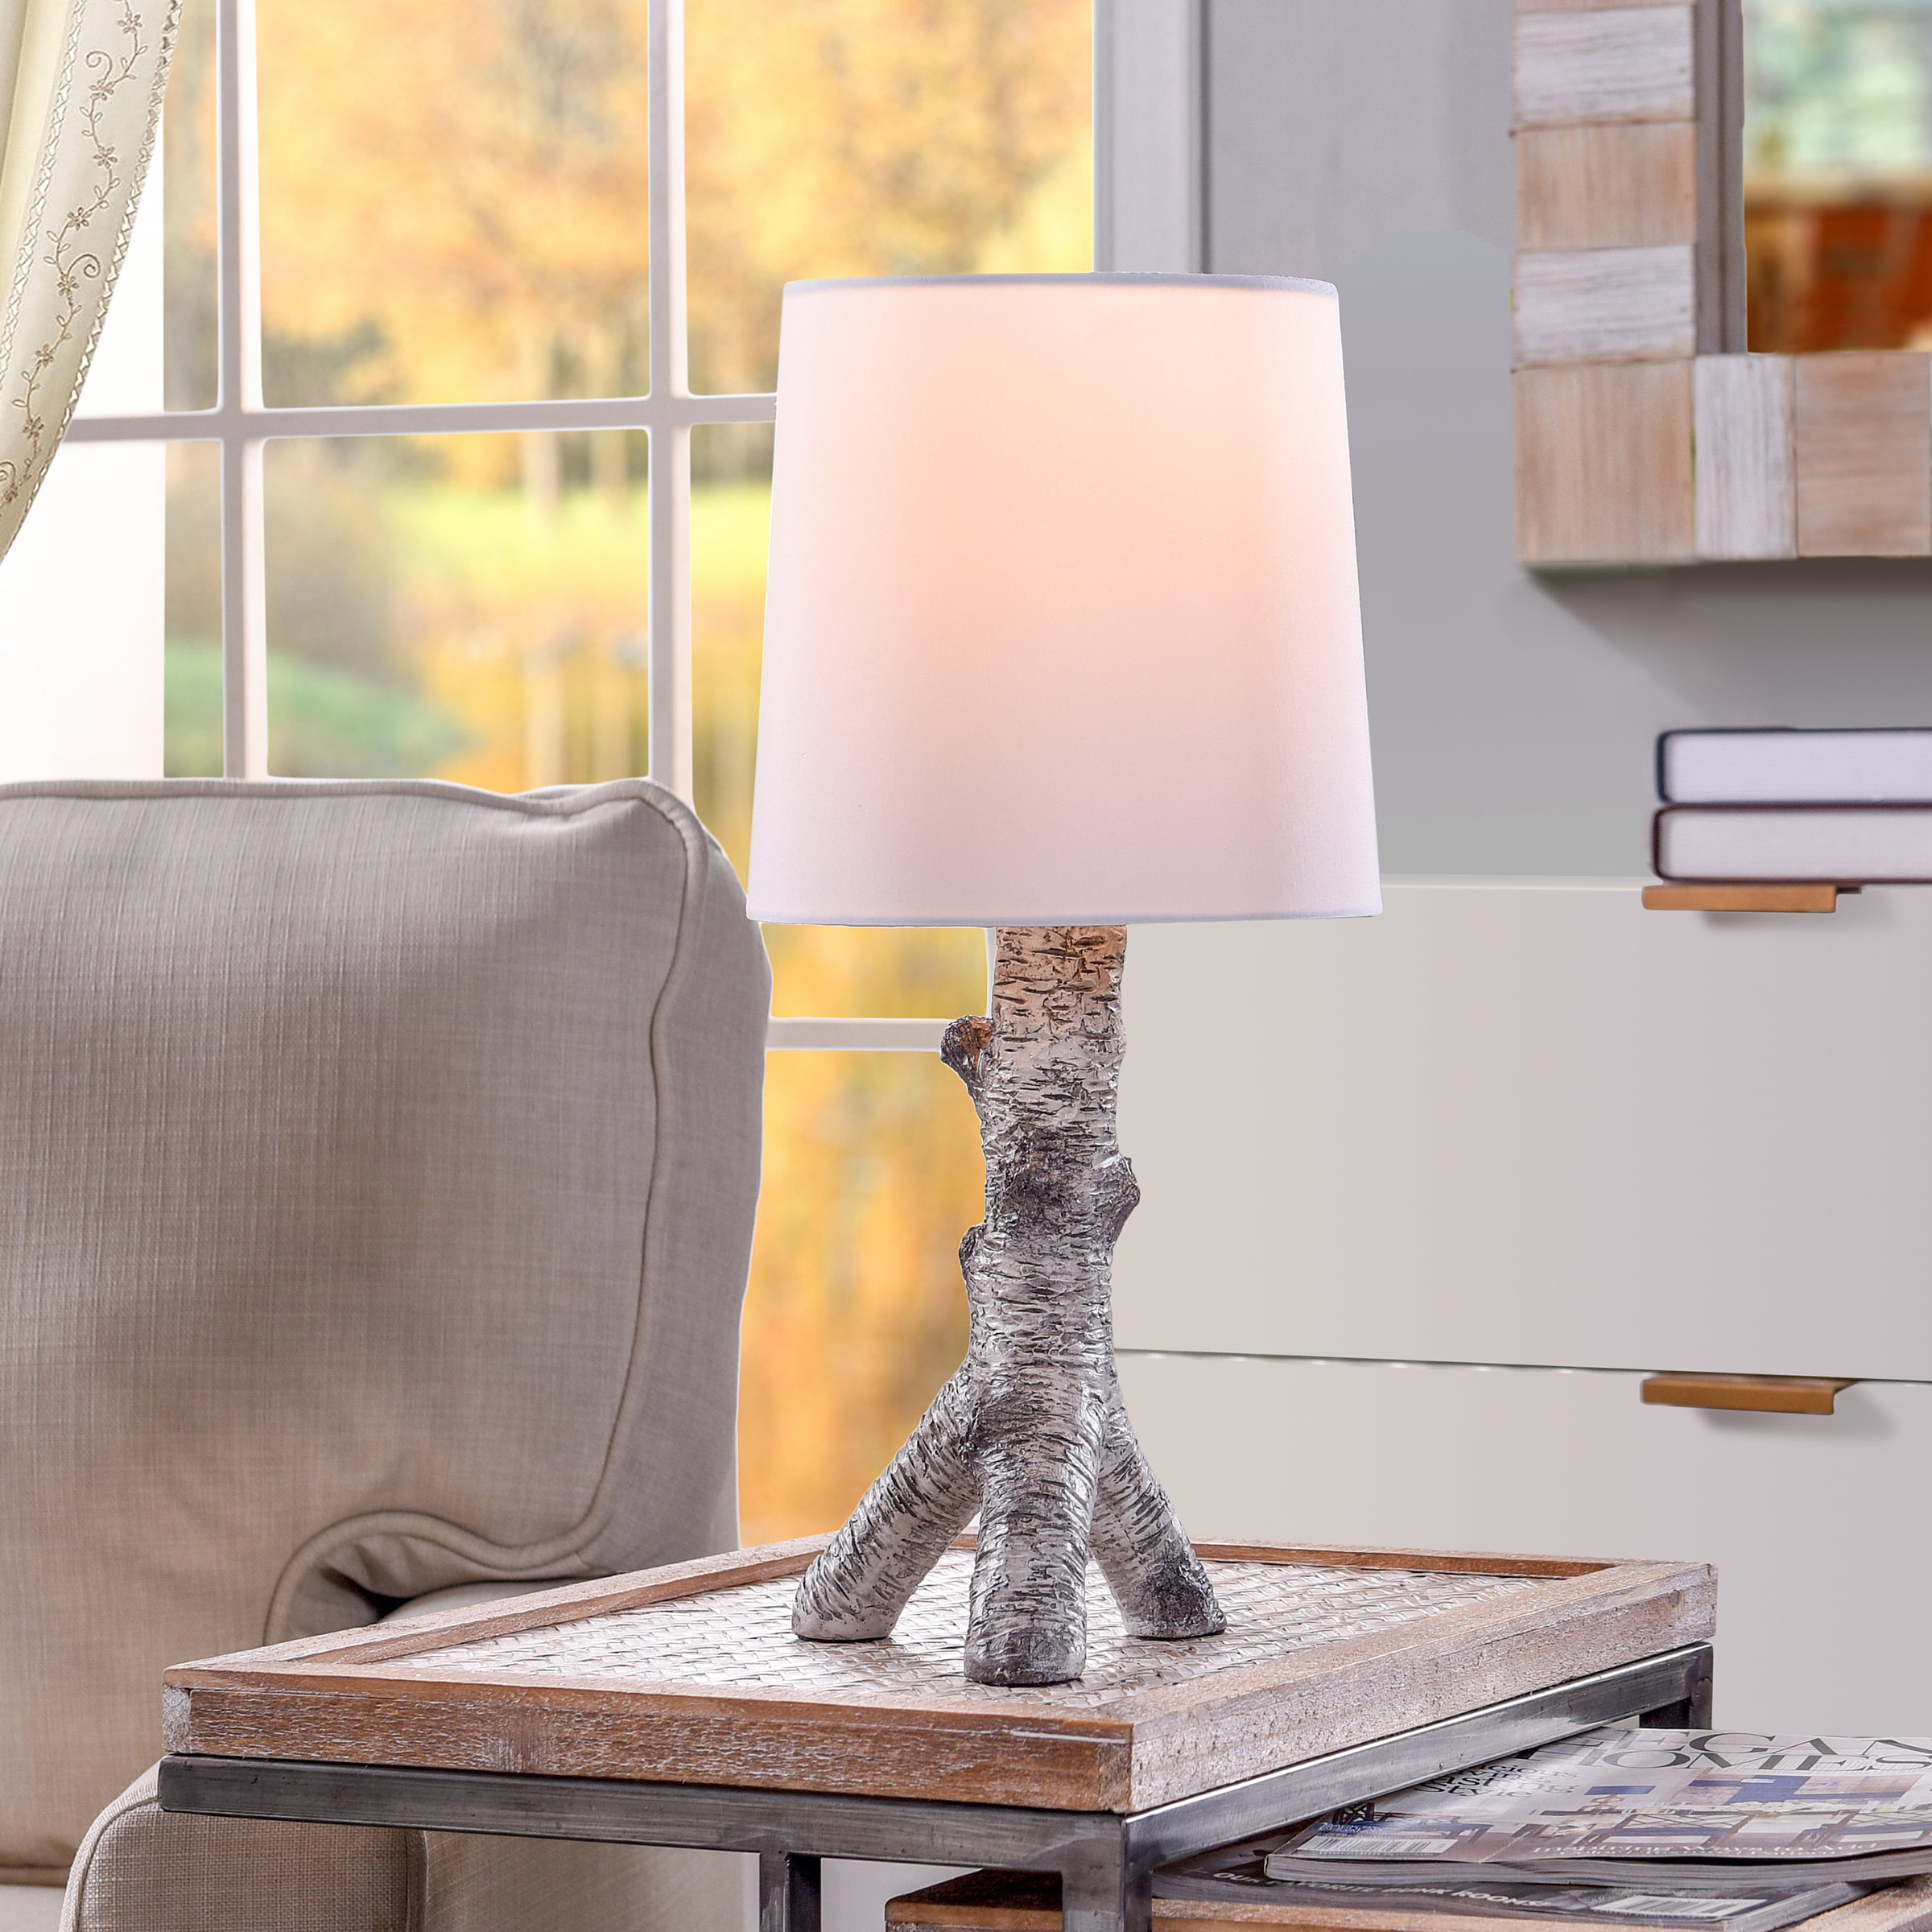 Mainstays White Birch Branch Table Lamp with White Shade， bulb included， 17.25